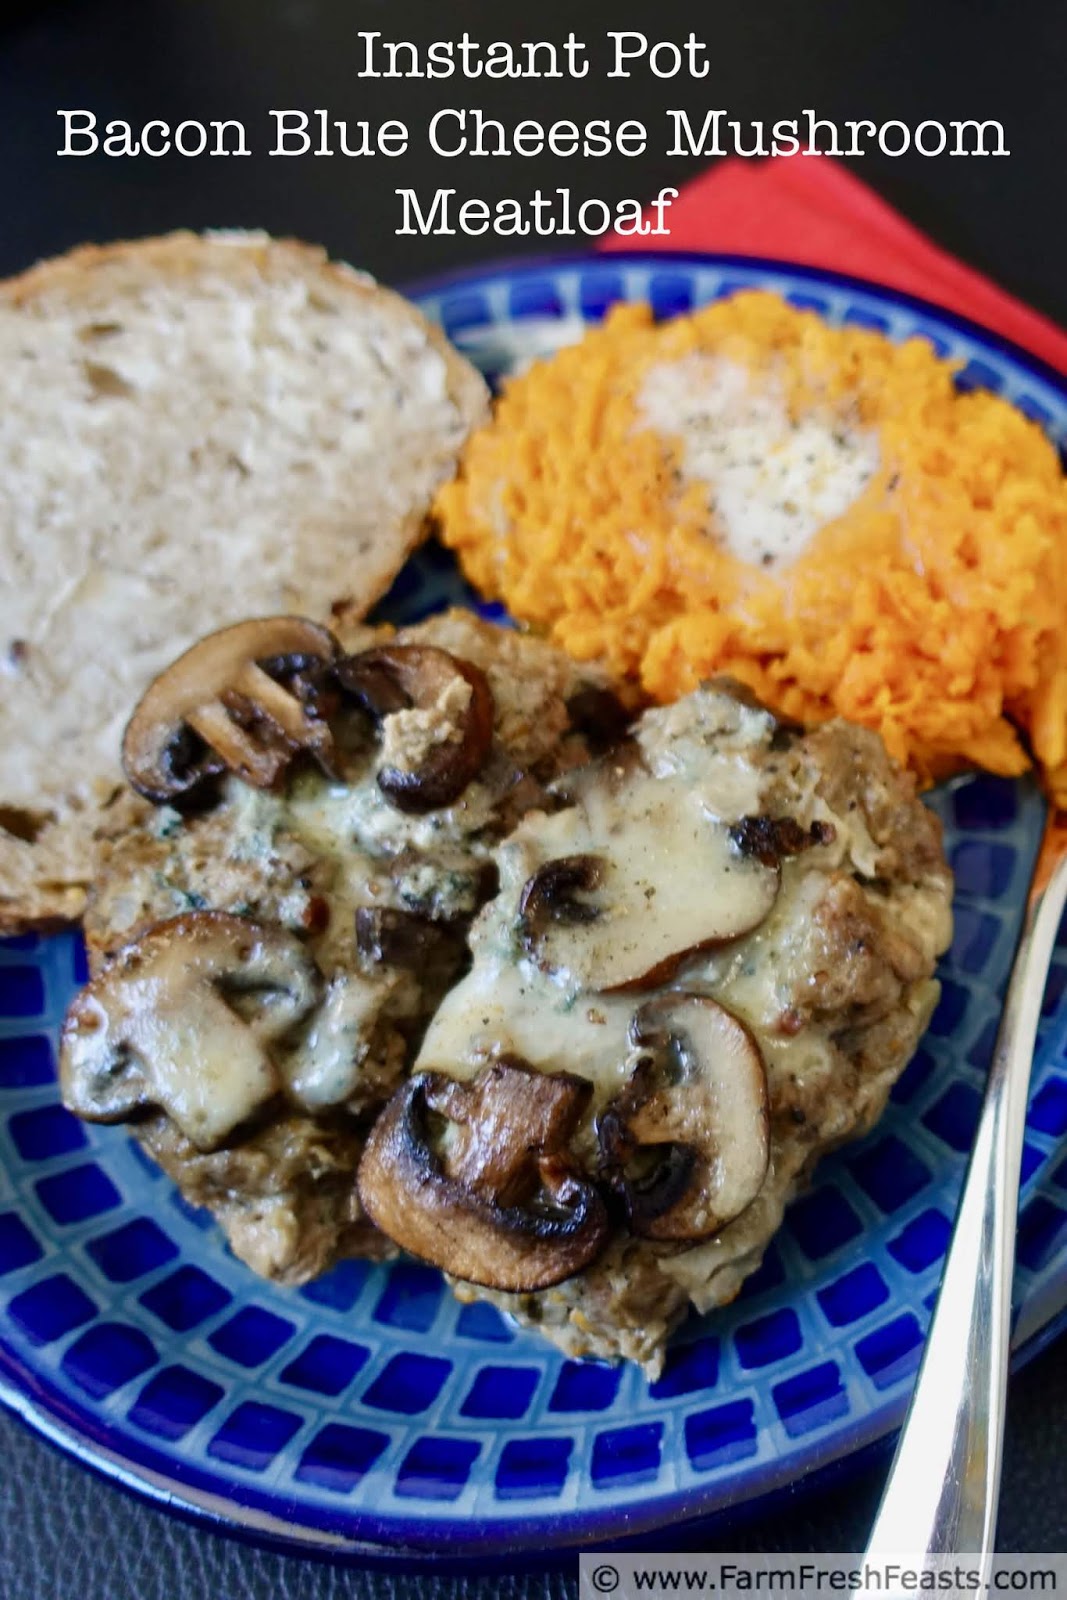 Farm Fresh Feasts: Instant Pot Bacon Blue Cheese Mushroom Meatloaf for ...